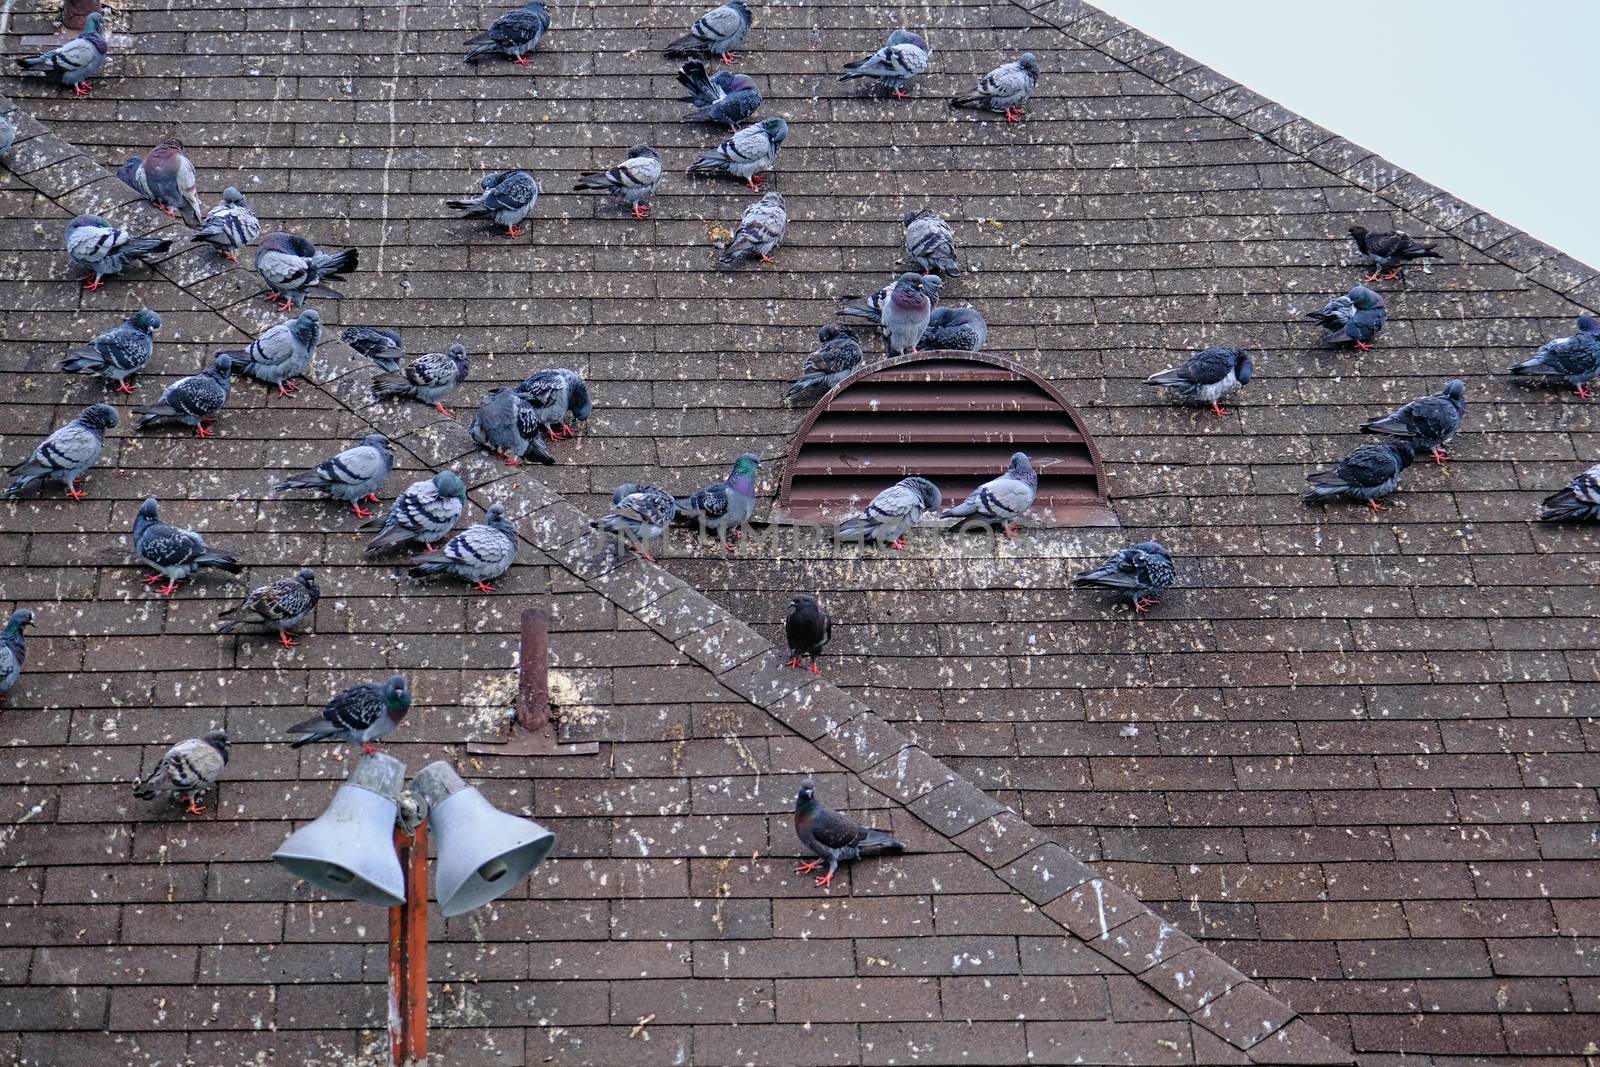 Pigeons Roosting on Roof with Brown Shingles